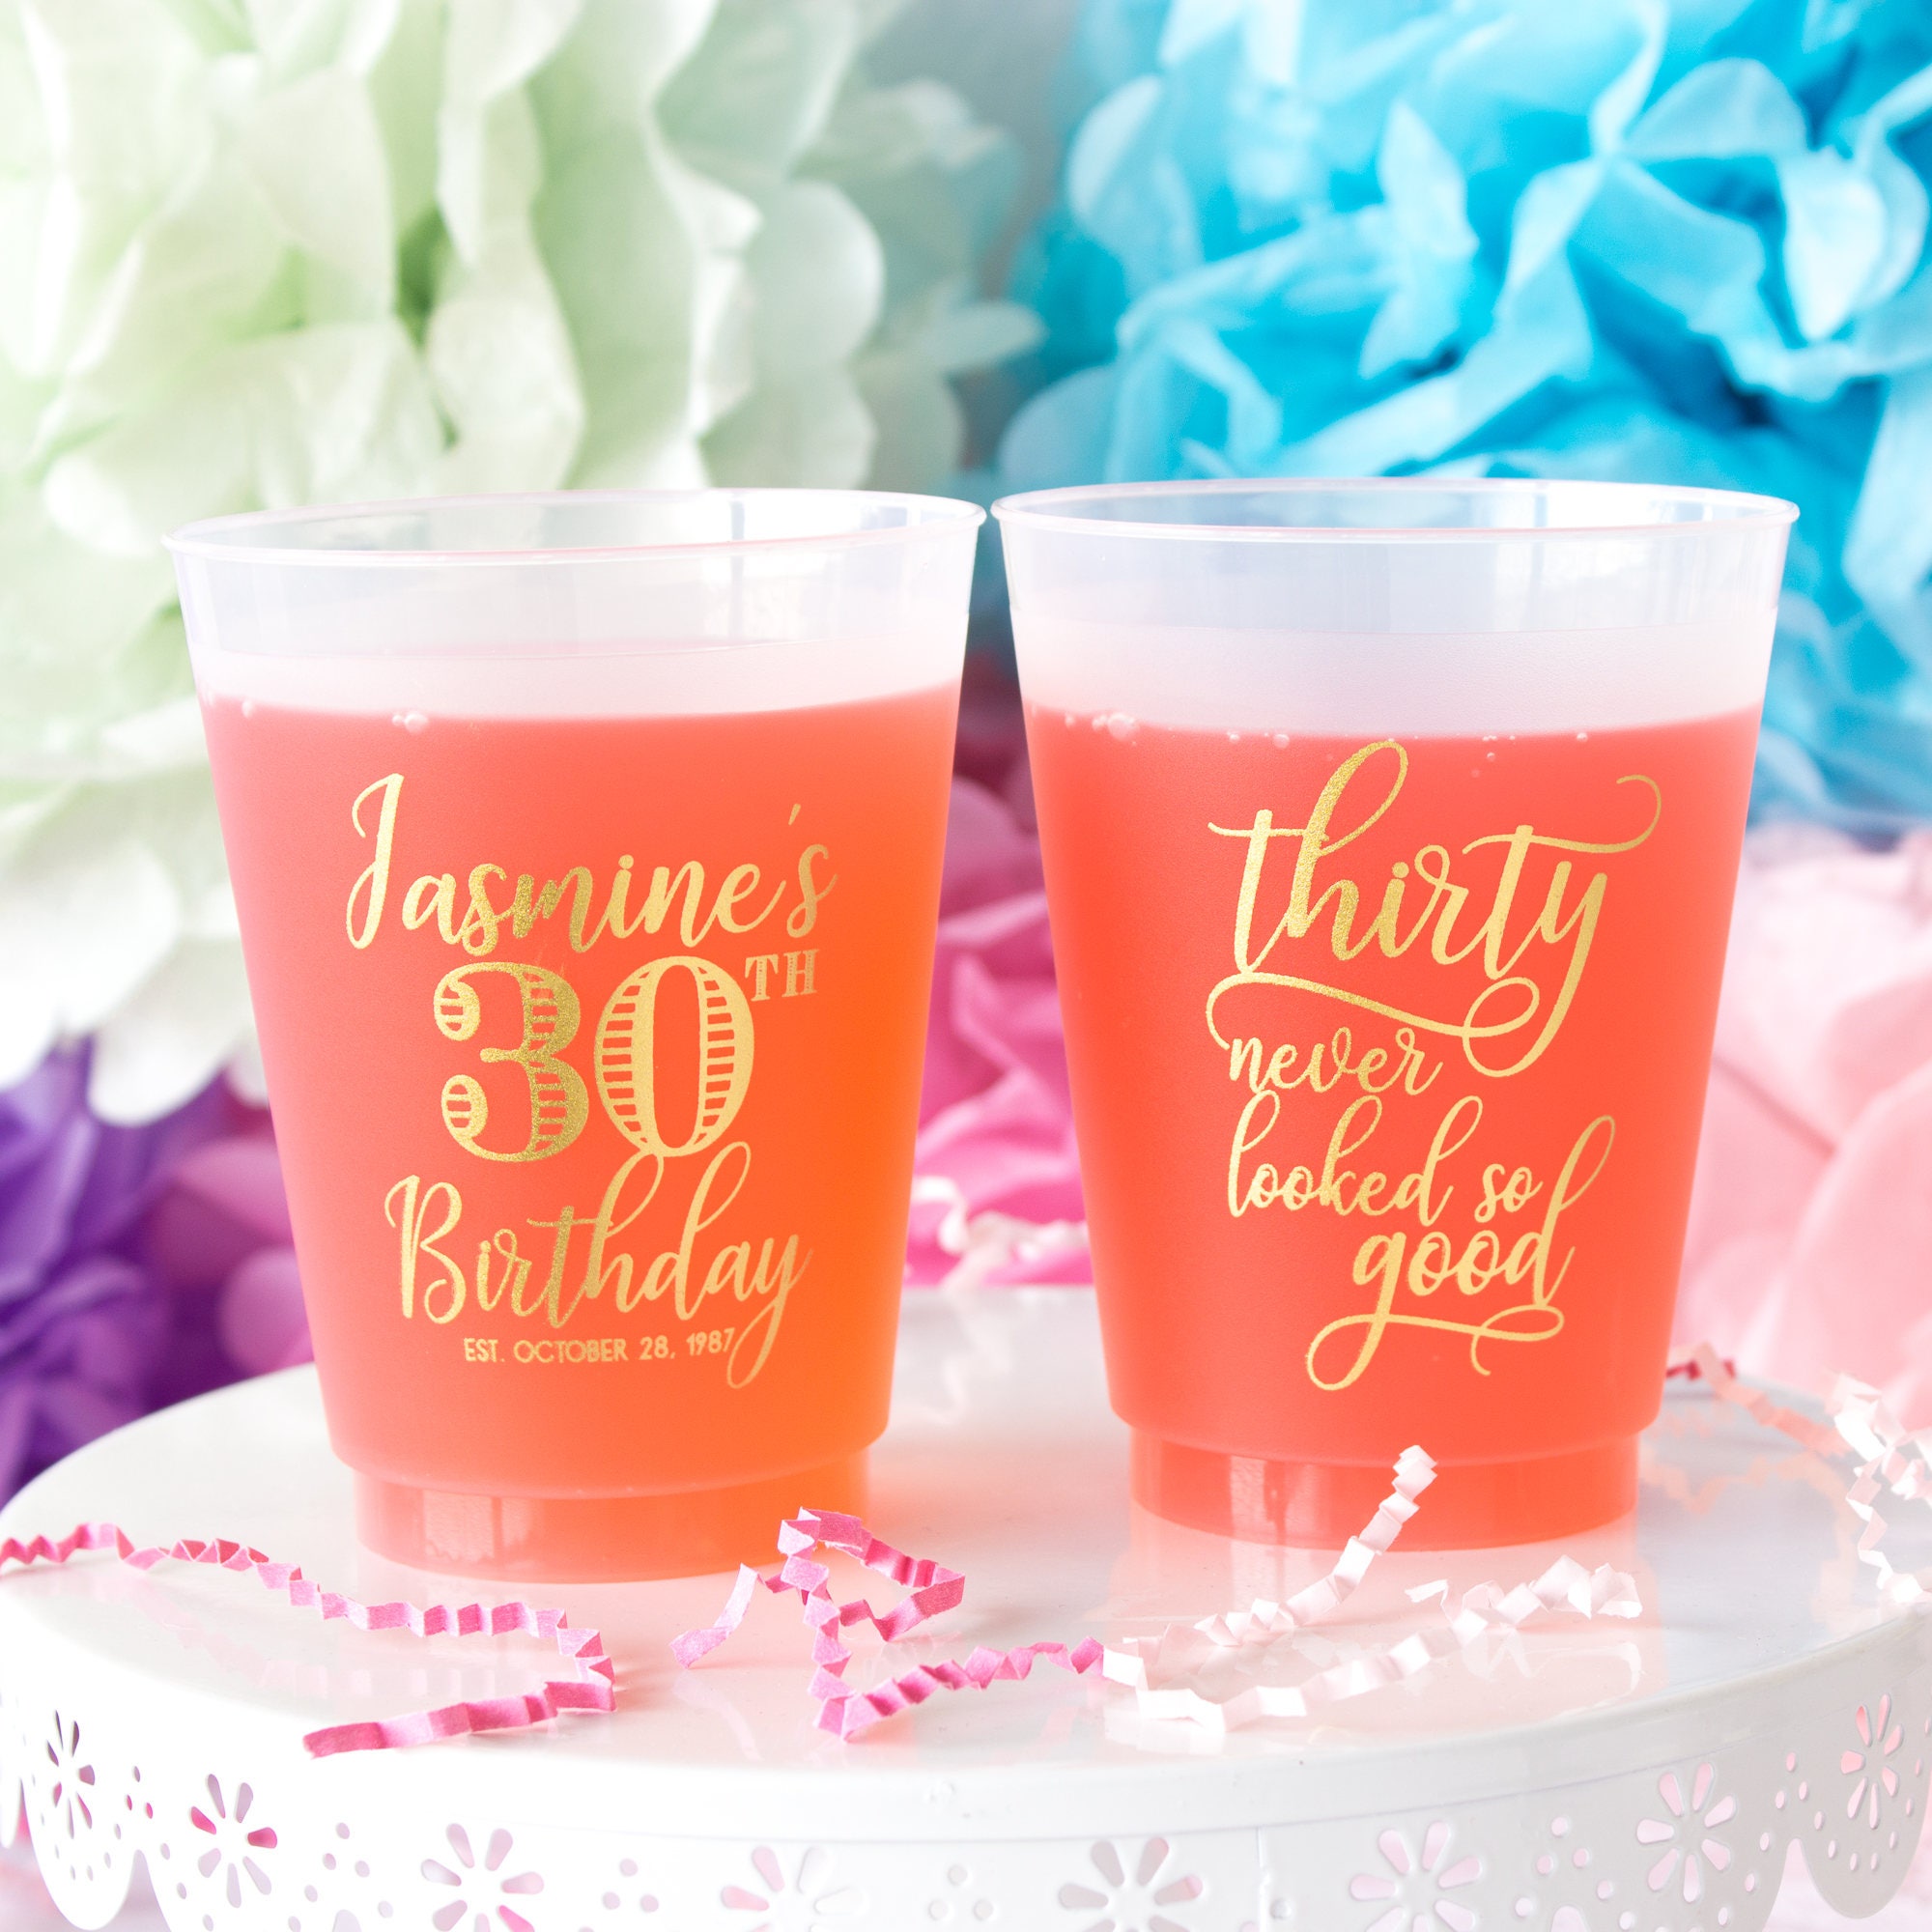 First Birthday Cups, First Birthday Party Cups, Personalized Cups,  Personalized Foam Cups, Monogrammed Birthday Cups, Monogrammed Cups 